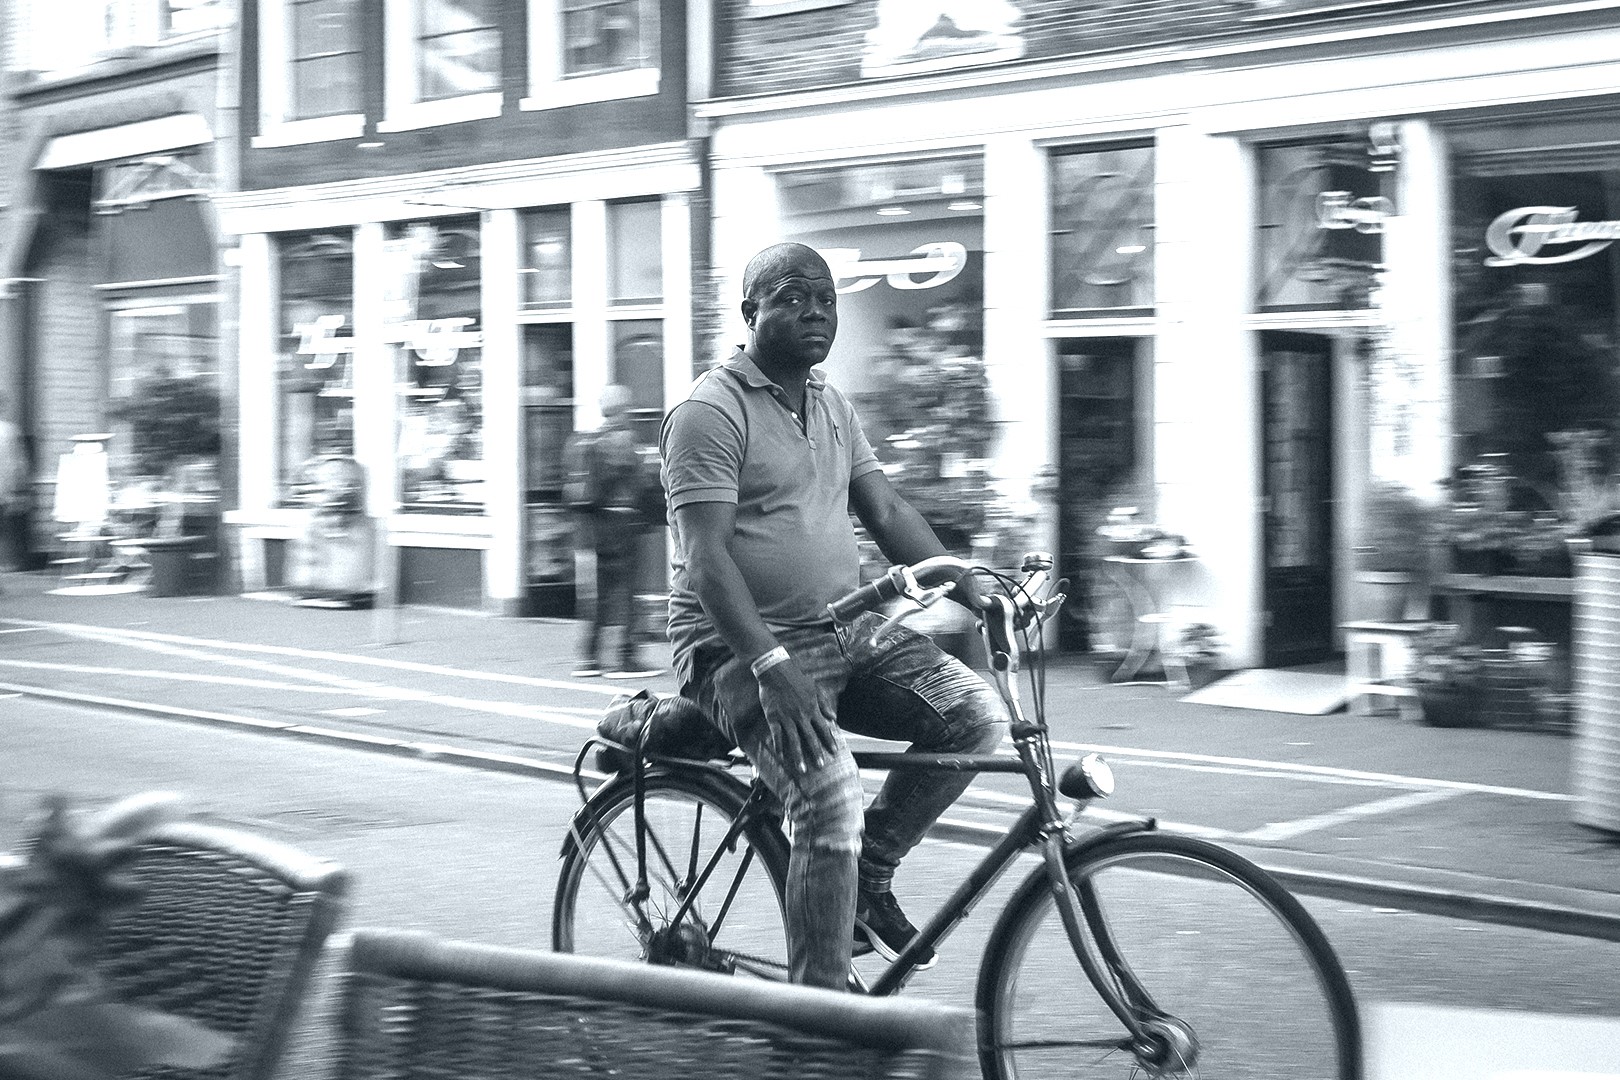 Street Photography in Amsterdam